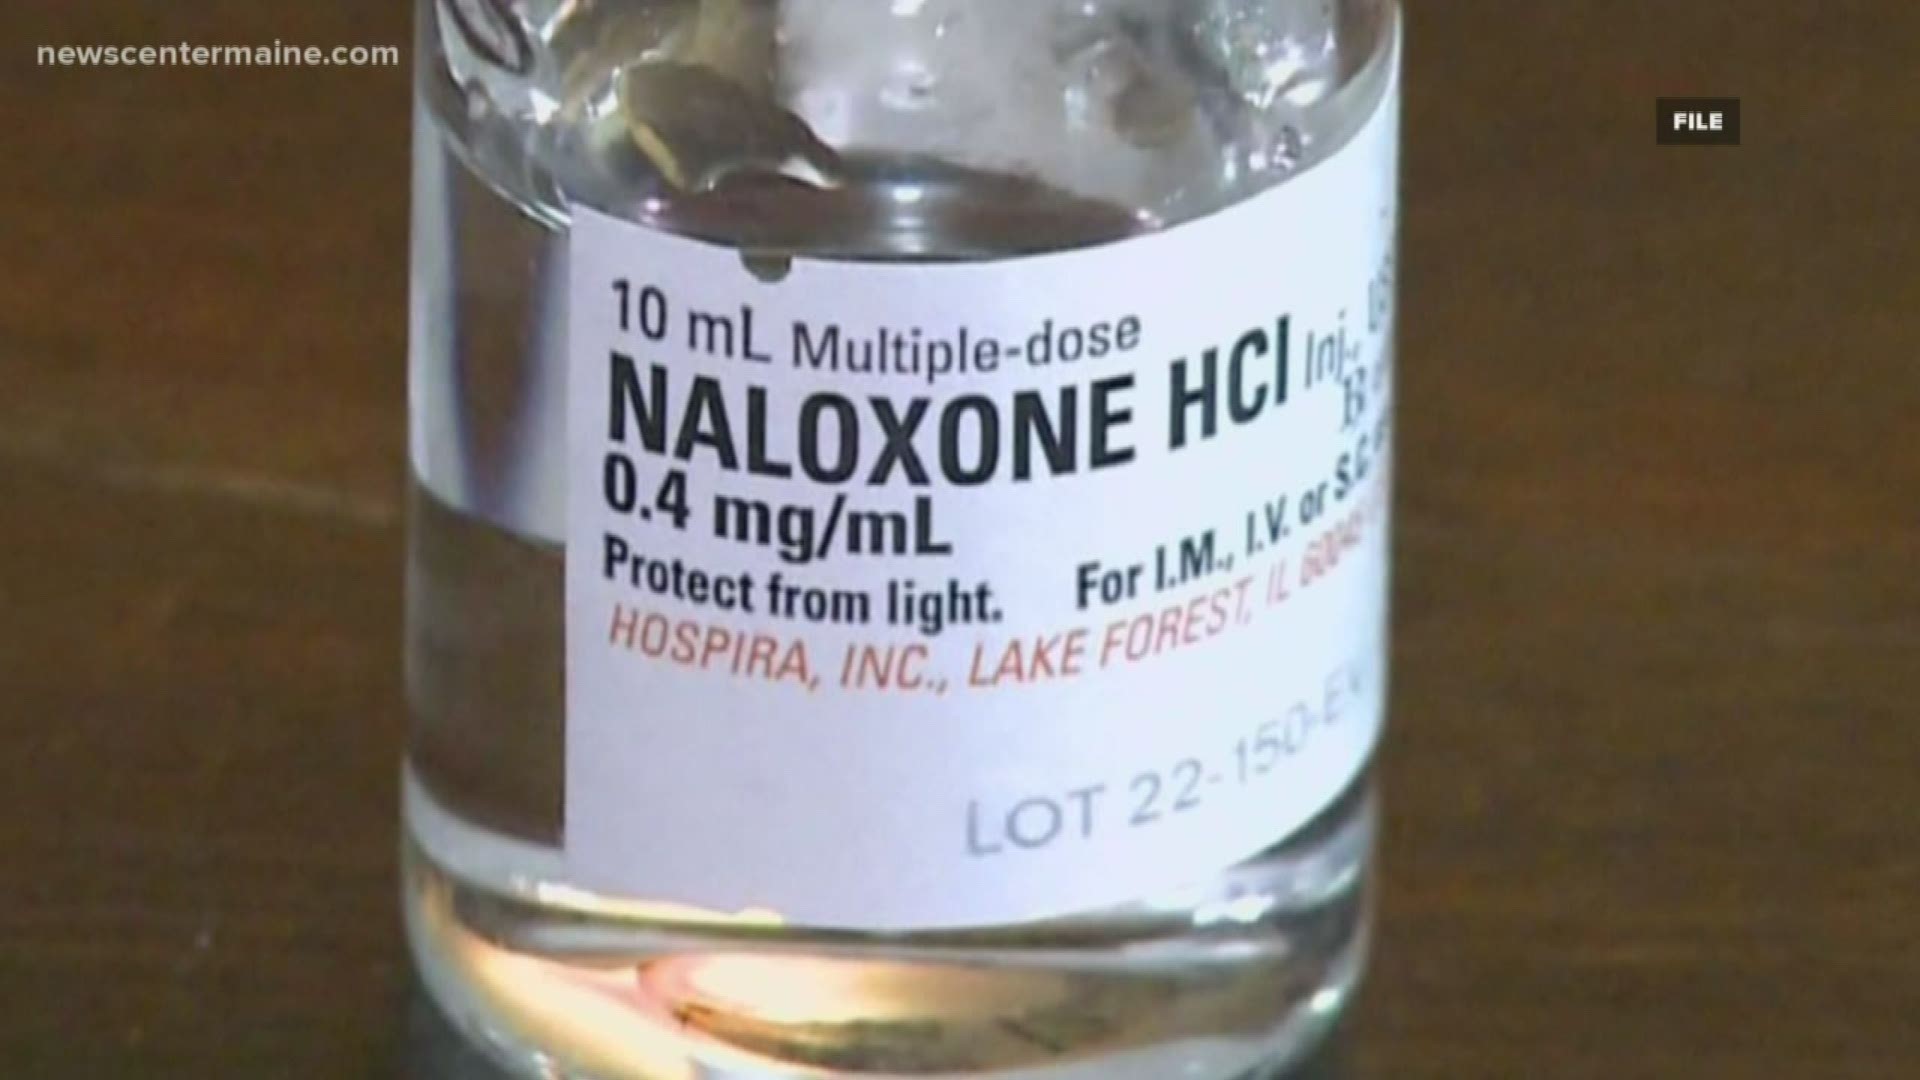 Research at Maine Medical Center has developed a new way to prescribe Naloxone.